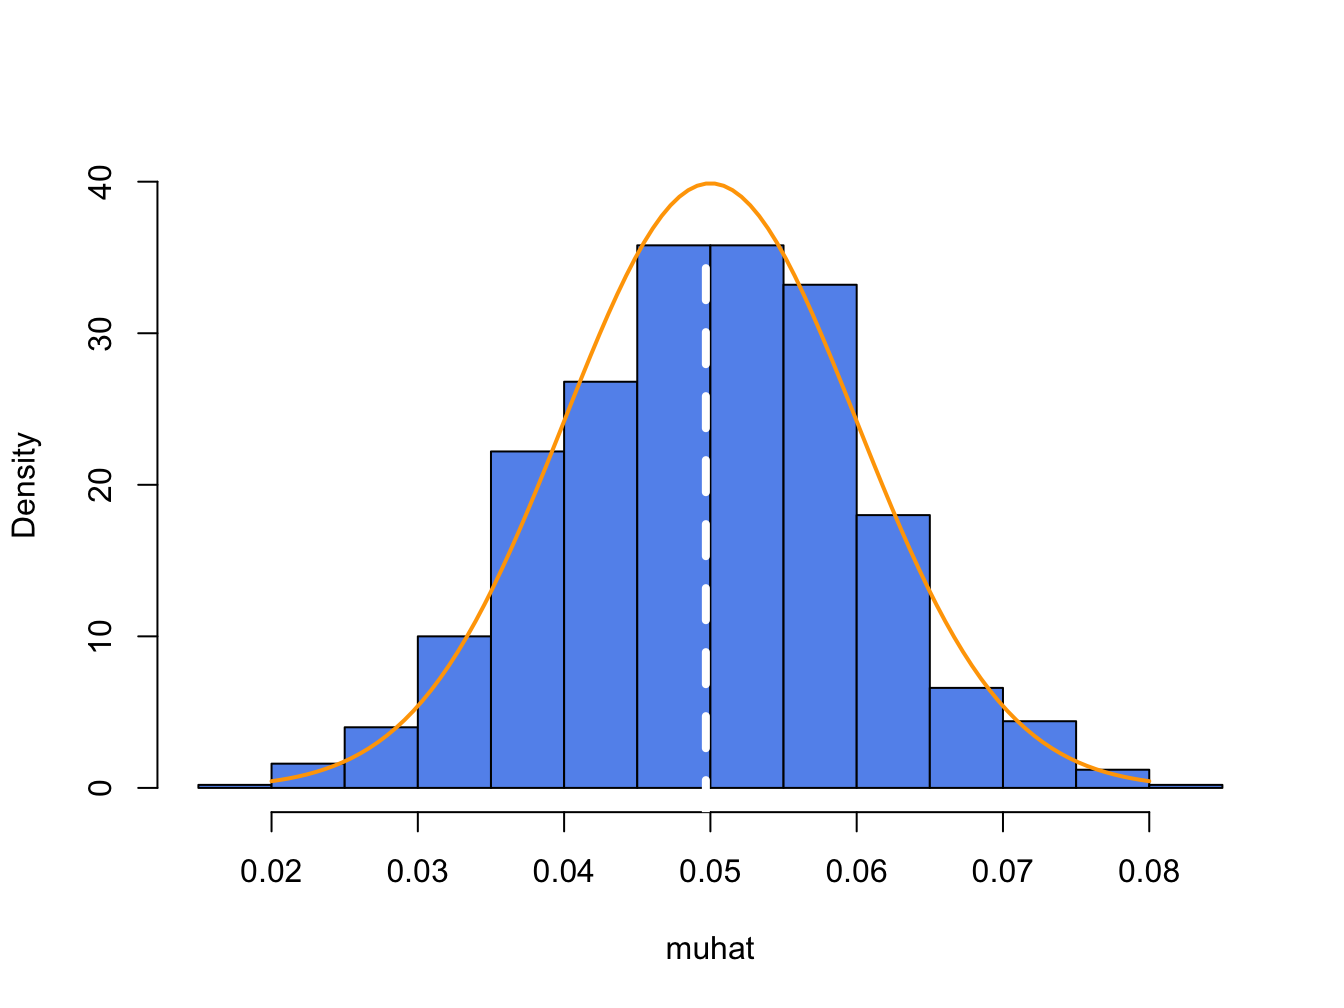 Distribution of $\hat{\mu}$ computed from $1000$ Monte Carlo simulations from the GWN model \@ref(eq:GWN-simulation-model). White dashed line is the average of the $\mu$ values, and orange curve is the true $f(\hat{\mu})$.